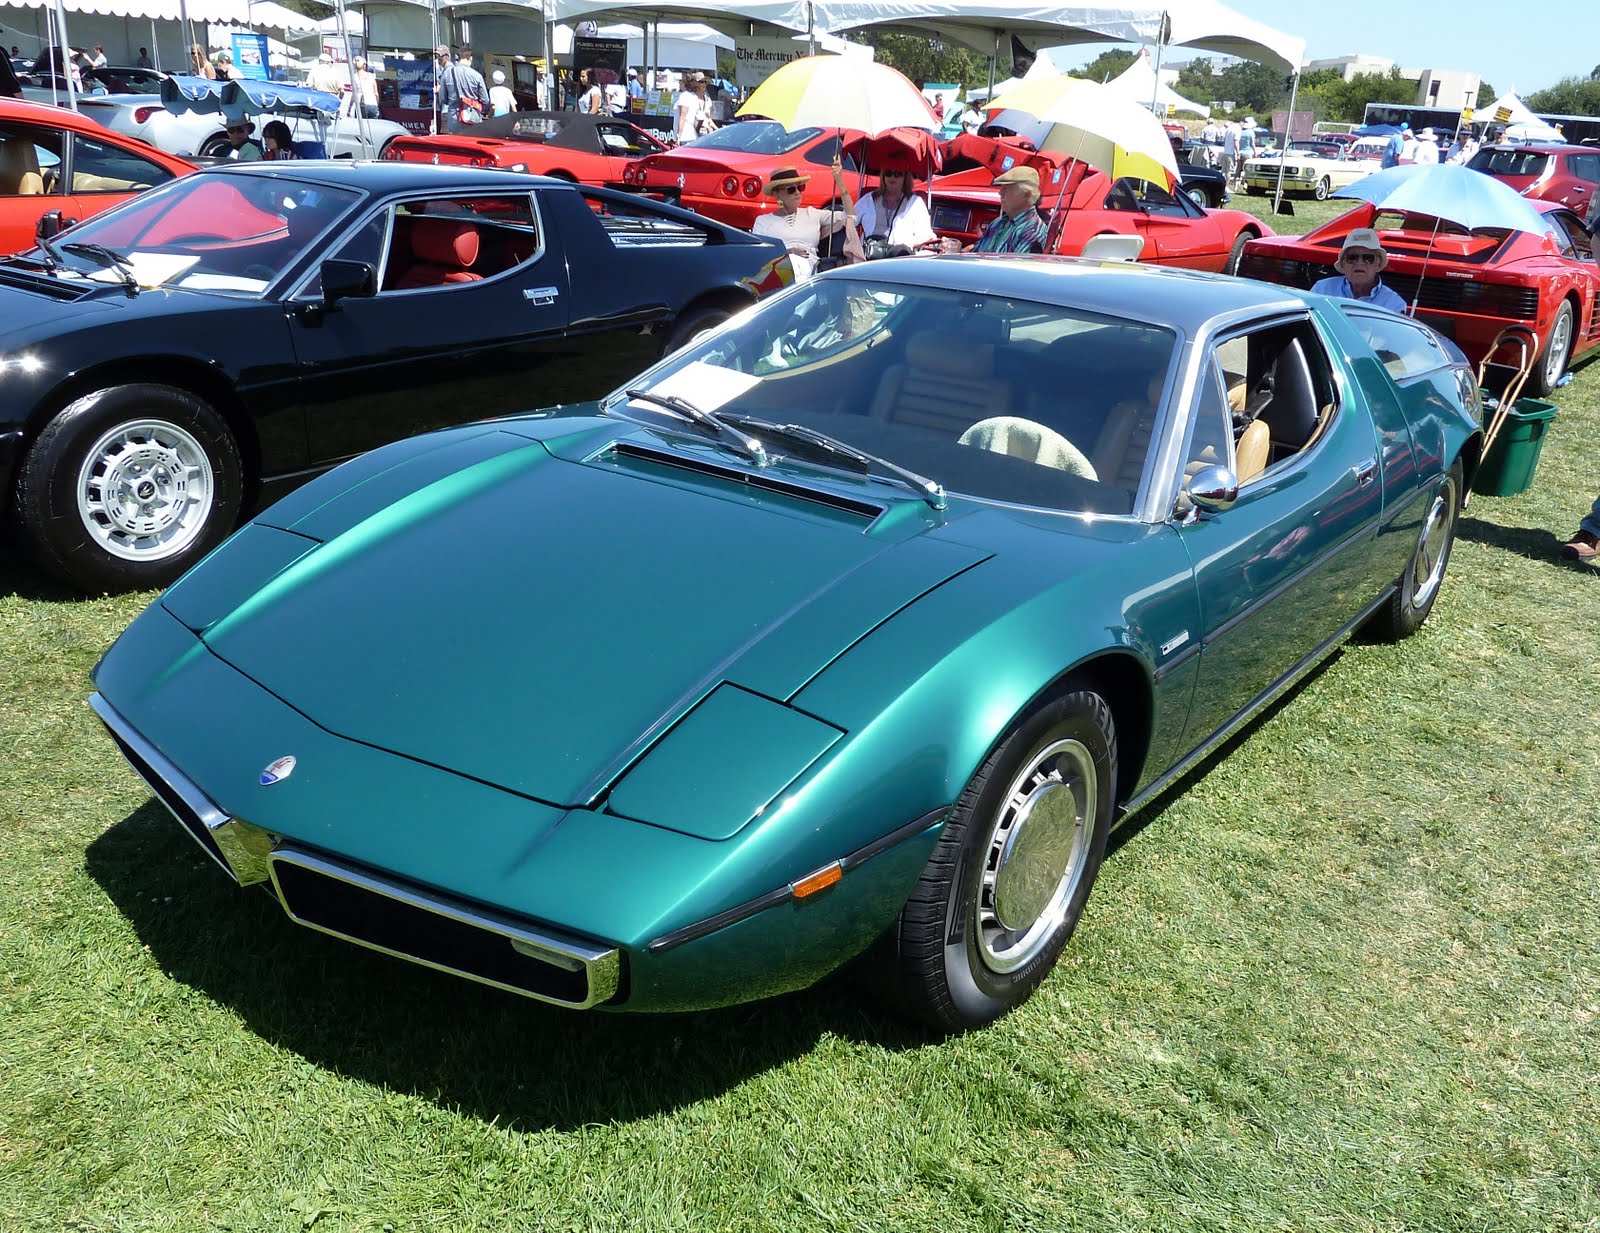 Why The Big Difference In Value Between The Maserati Bora and The Iso Grifo?